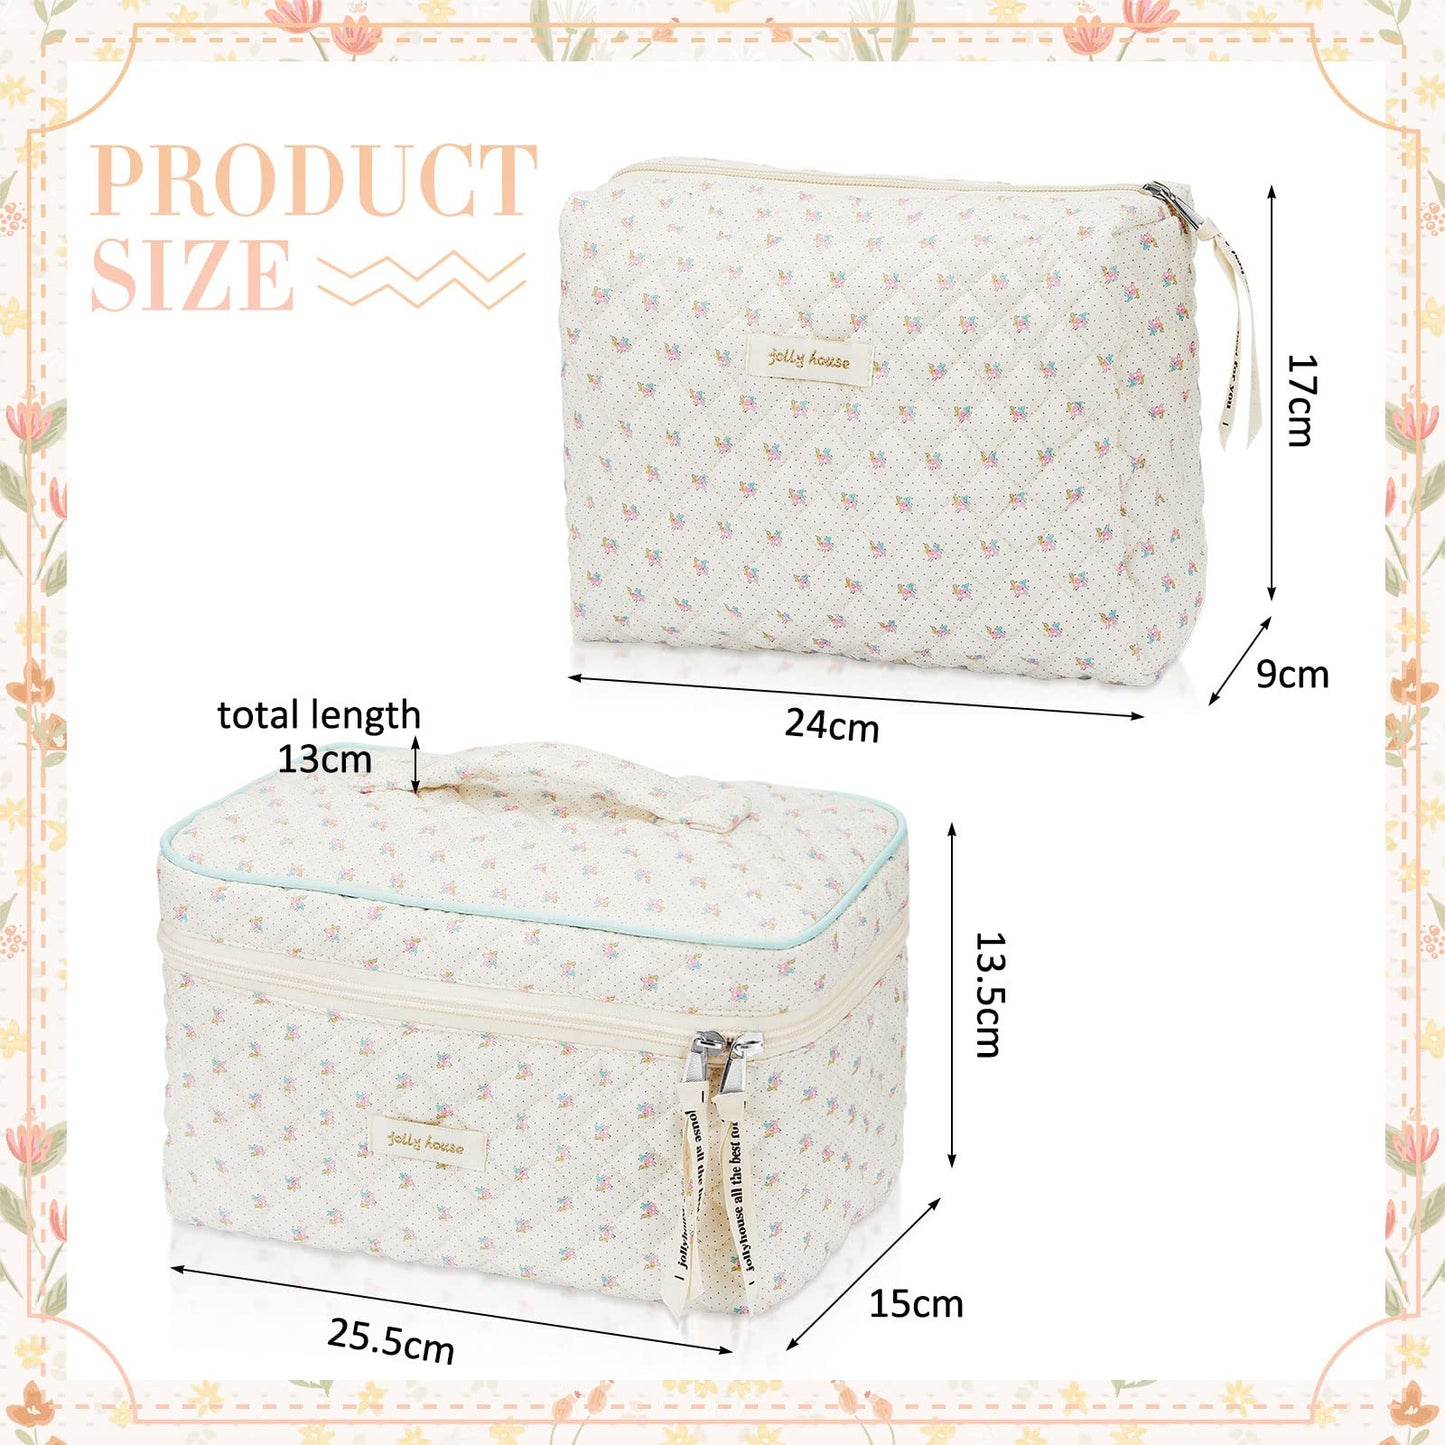 Zeyune 2 Pcs Cotton Quilted Makeup Bag, Large Travel Coquette Cosmetic Bag, Aesthetic Cute Floral Cherry Peony Toiletry Organizer skincare Bag for Women Girls(Floral Style)